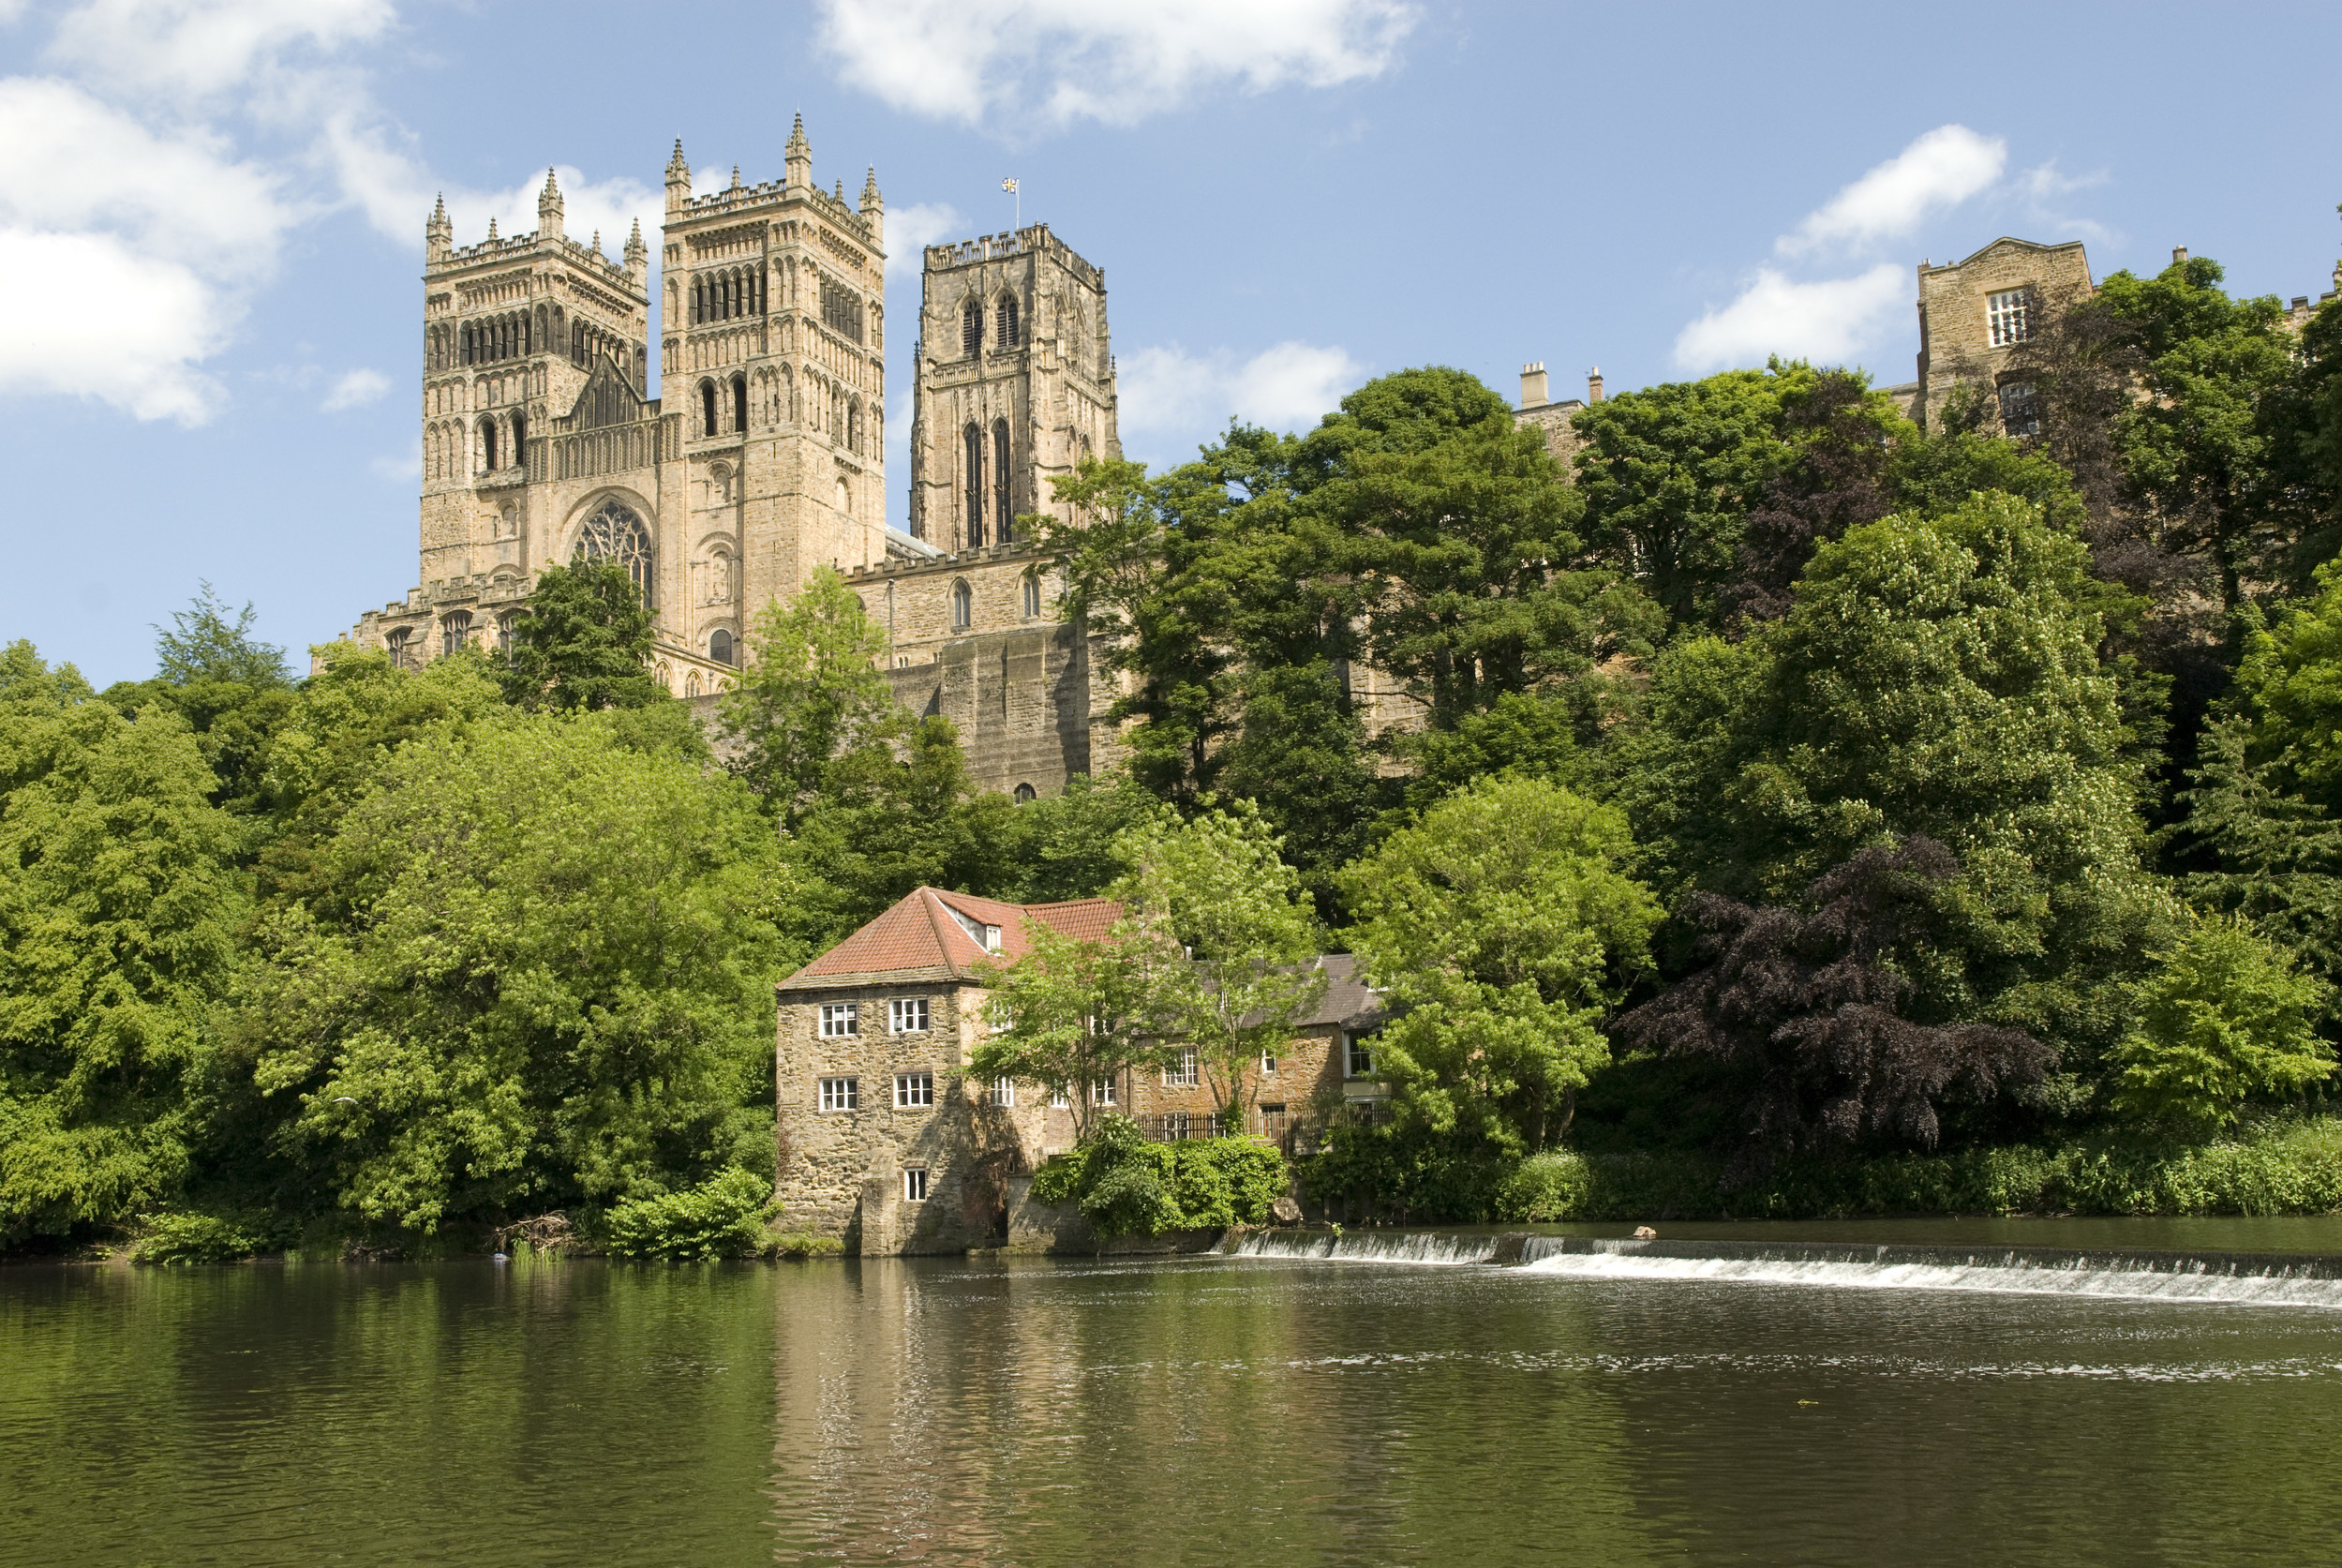 TView of Durham Cathedral across the River Wear